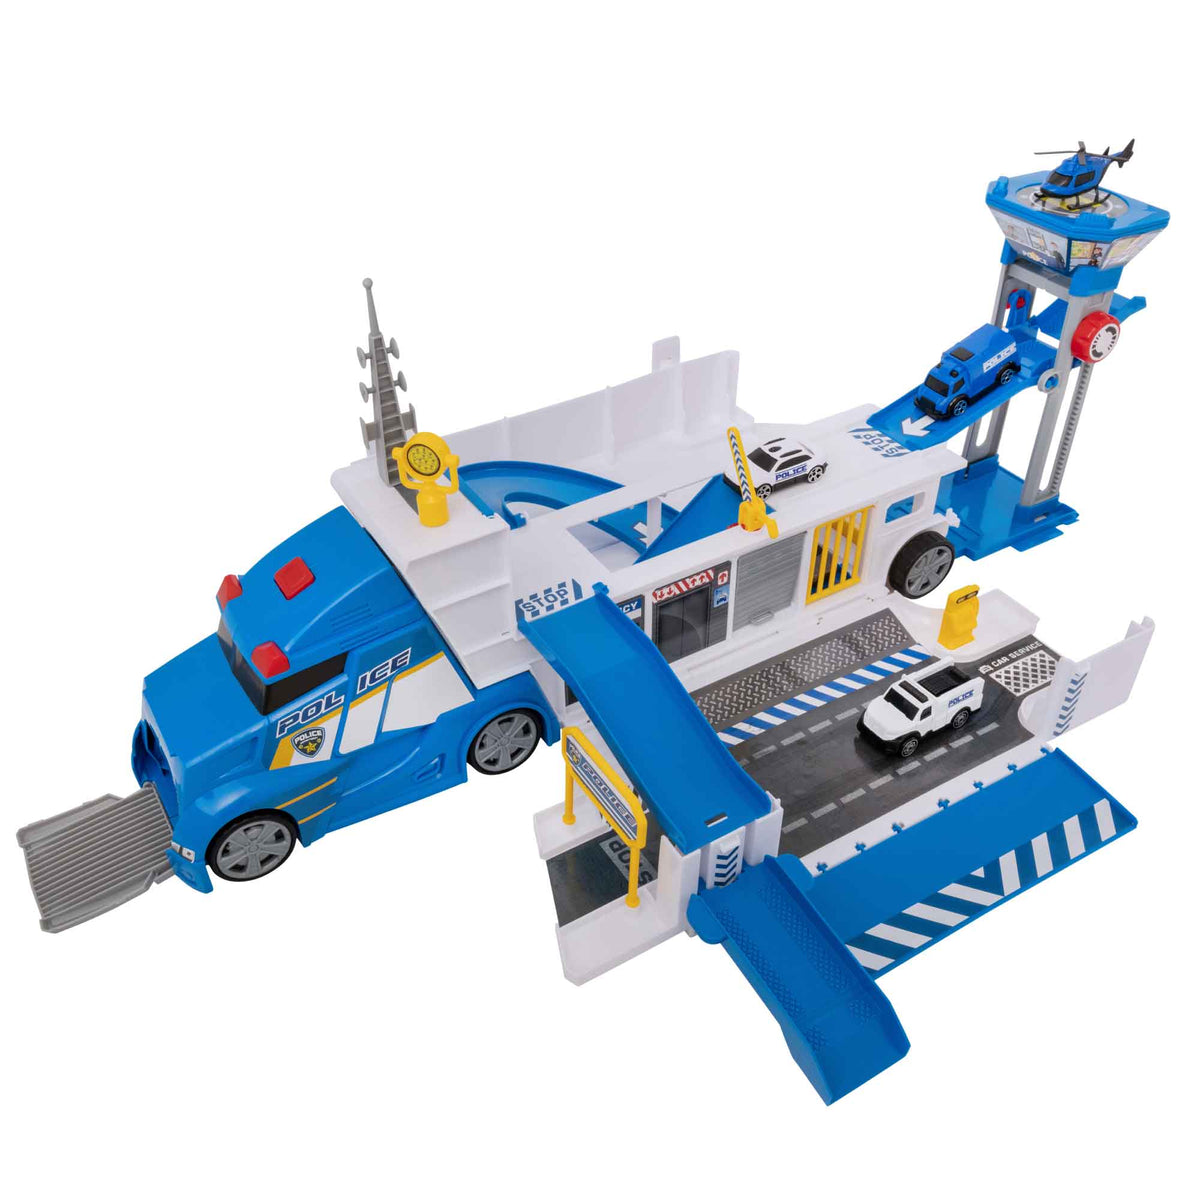 Teamsterz Police Command Toy Truck with 5 Cars